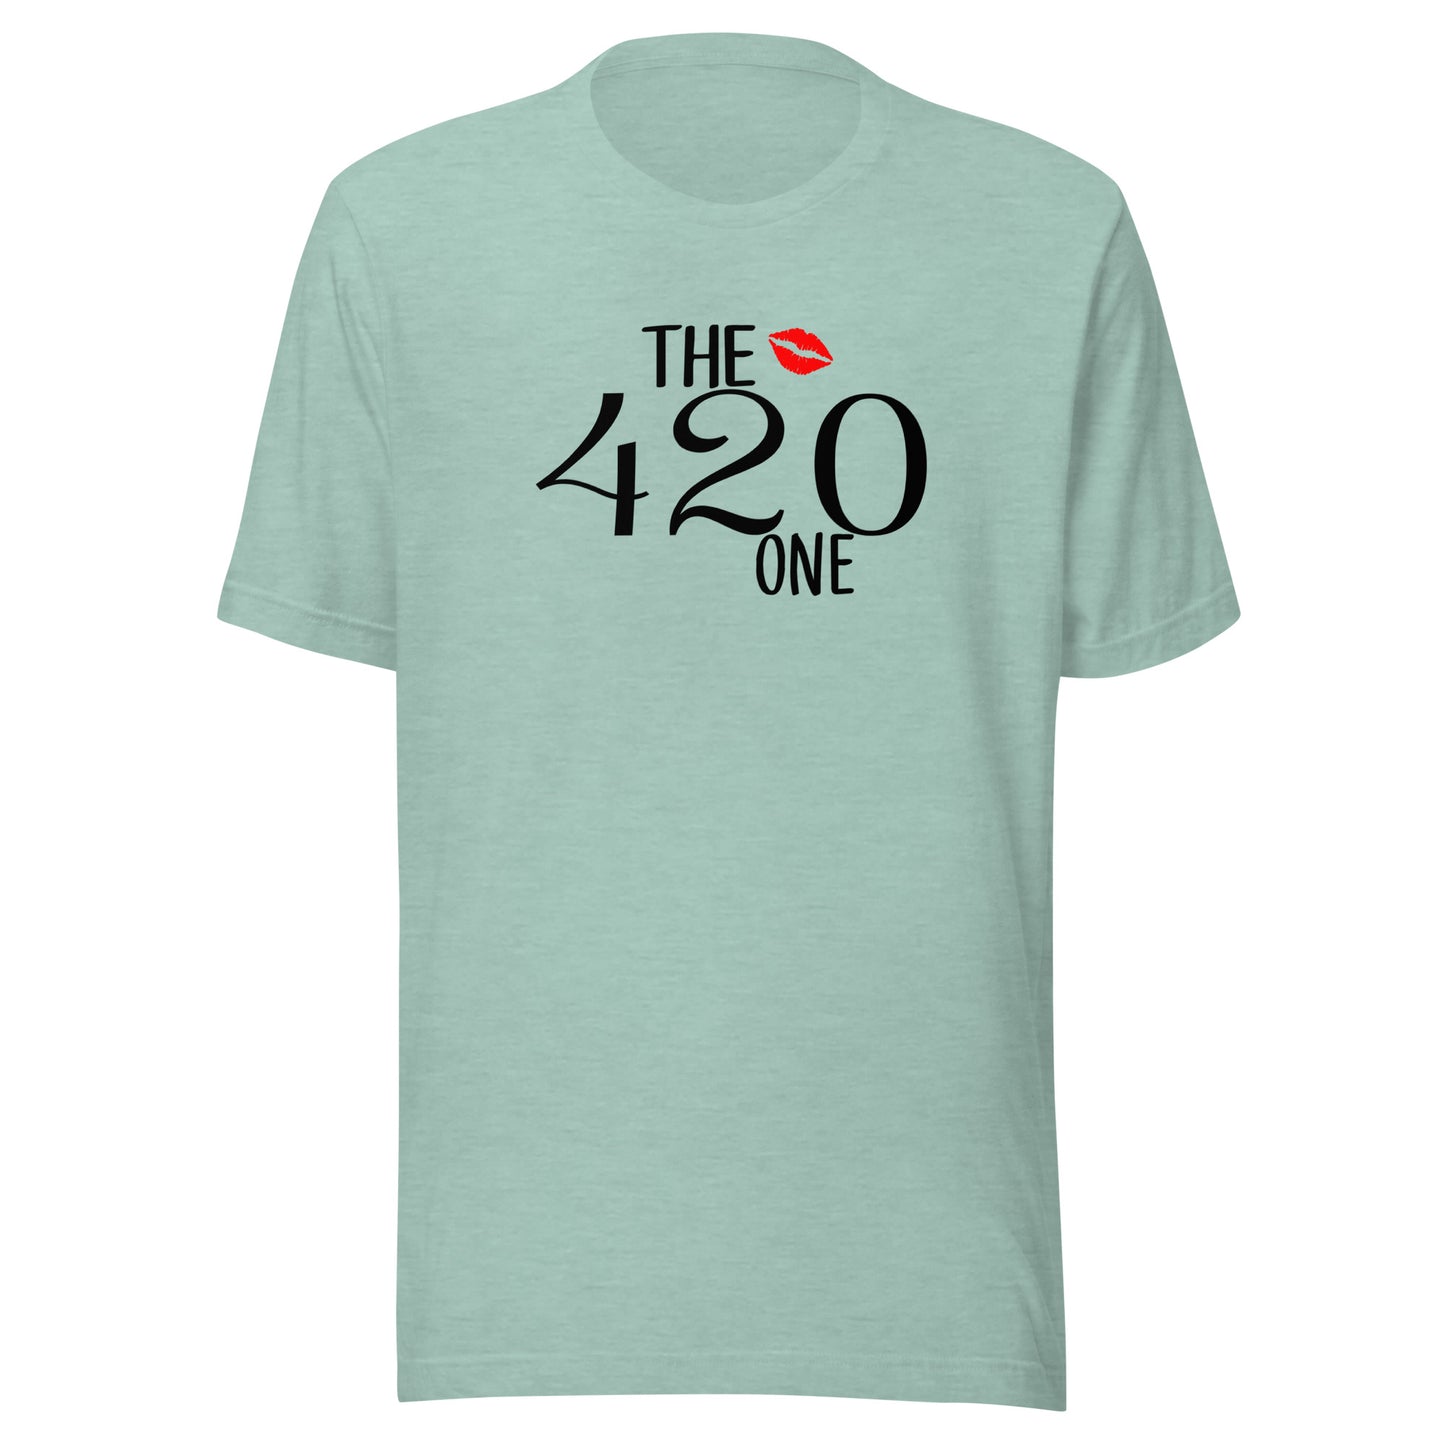 4XL The 420 One (black letters)